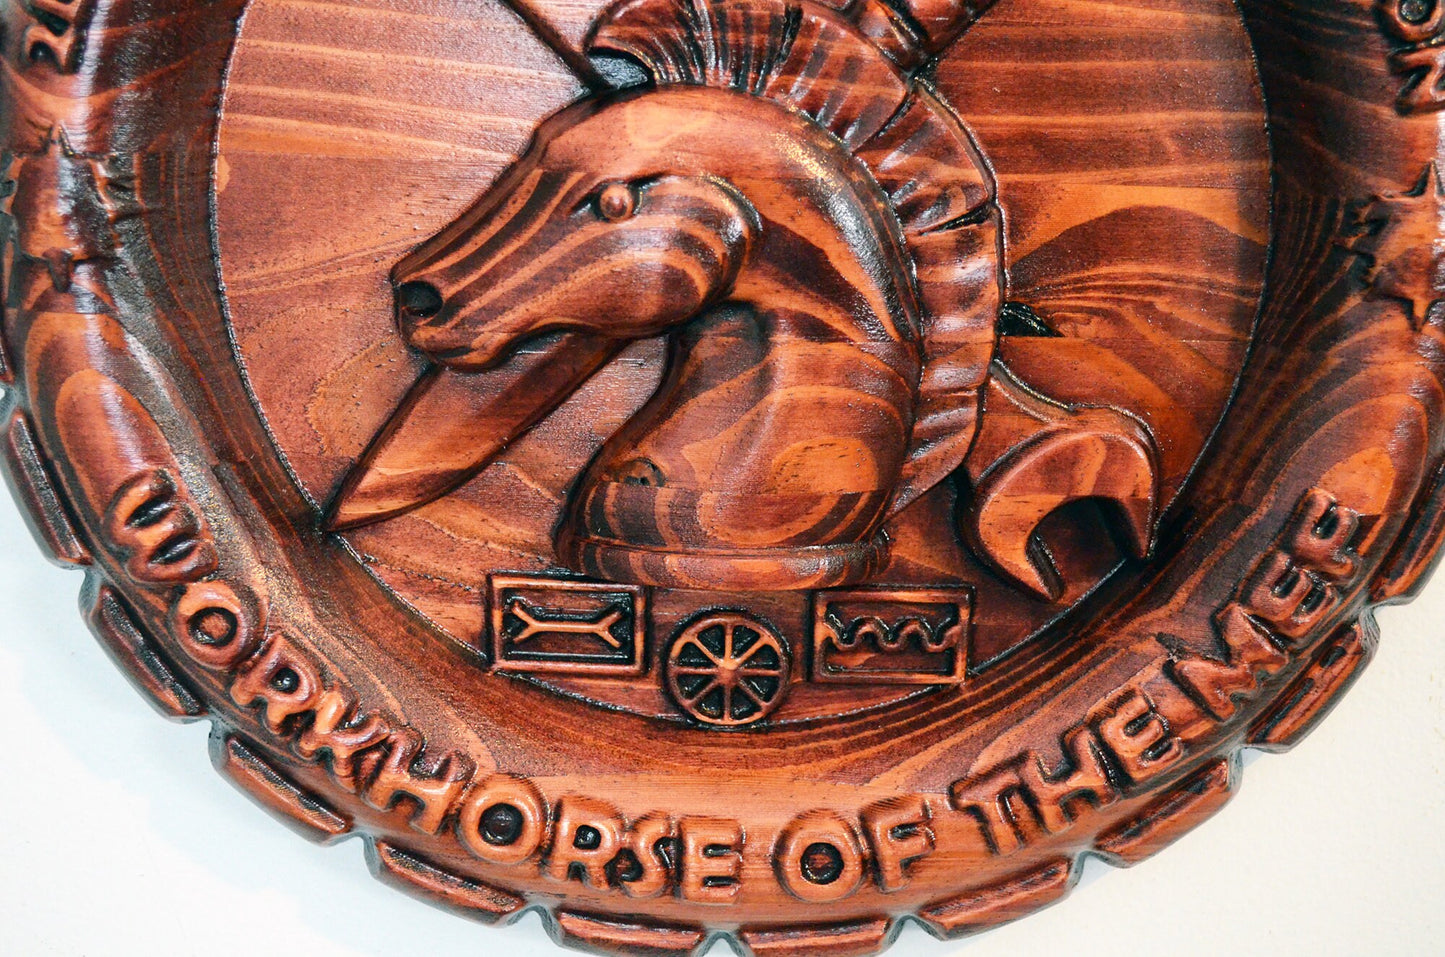 USMC 2nd Transportation Support Battalion, 3d wood carving, military plaque, US Marine Corps